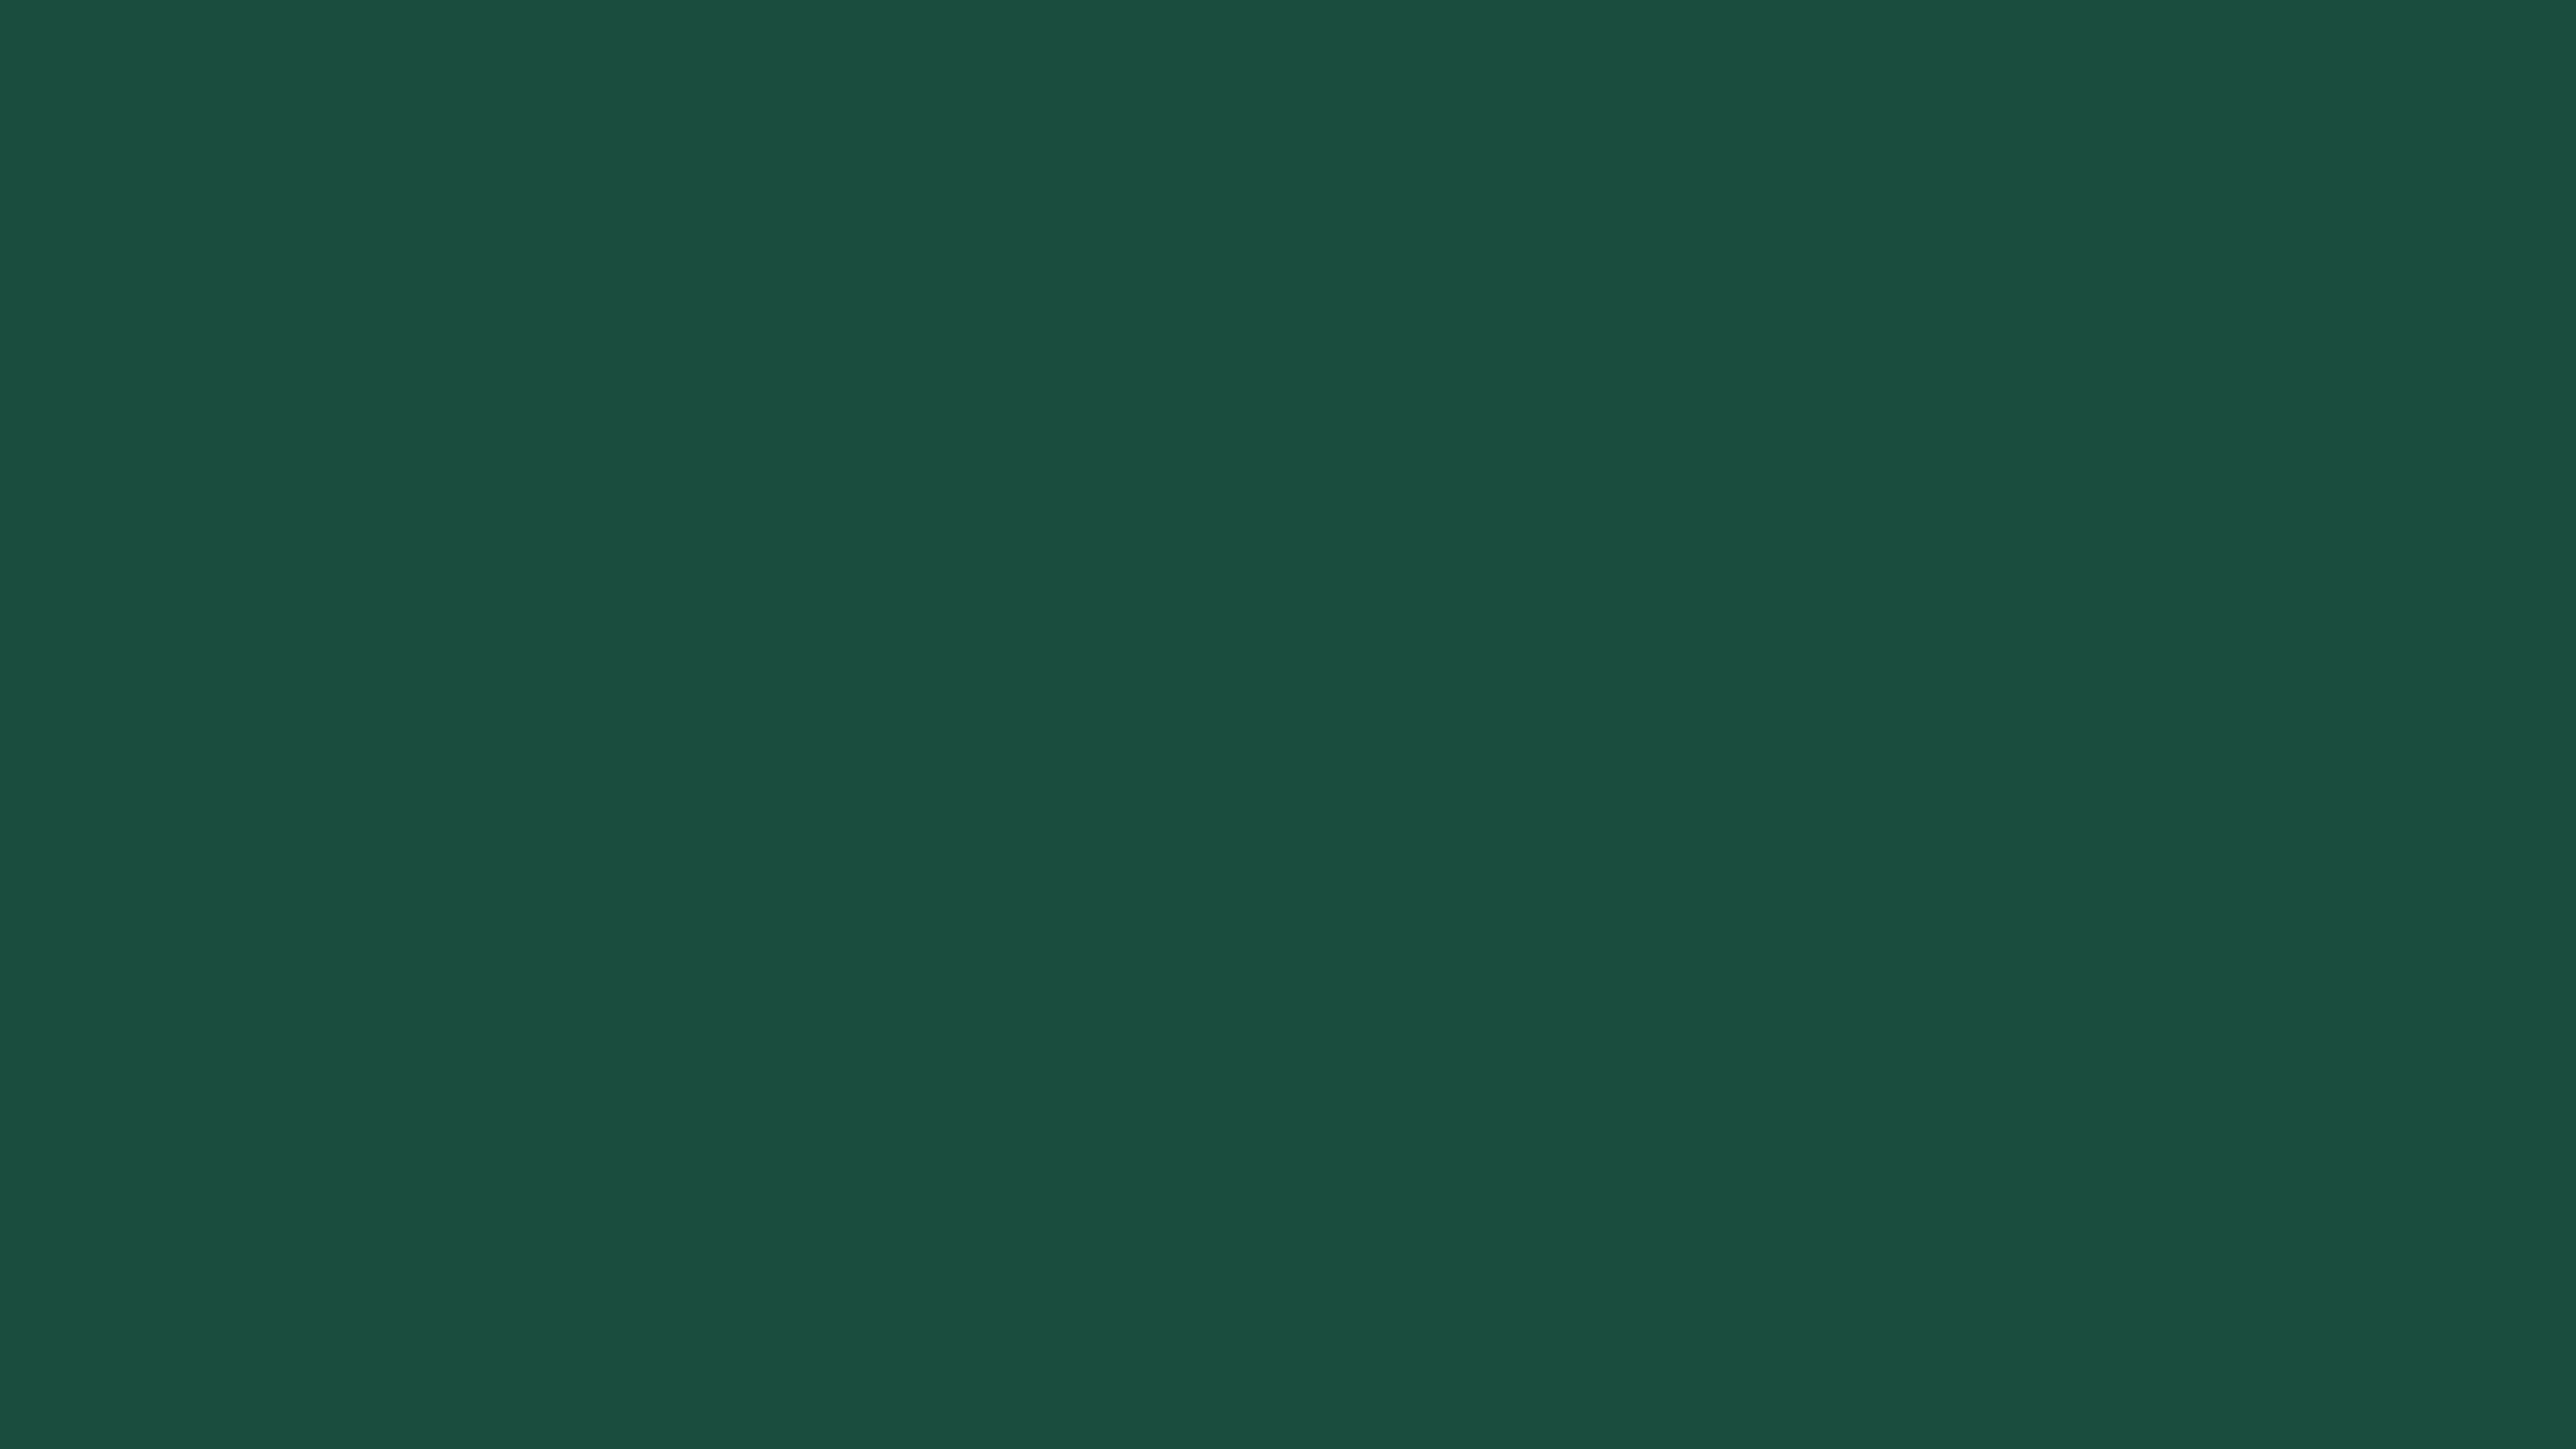 3840x2160 English Green Solid Color Background